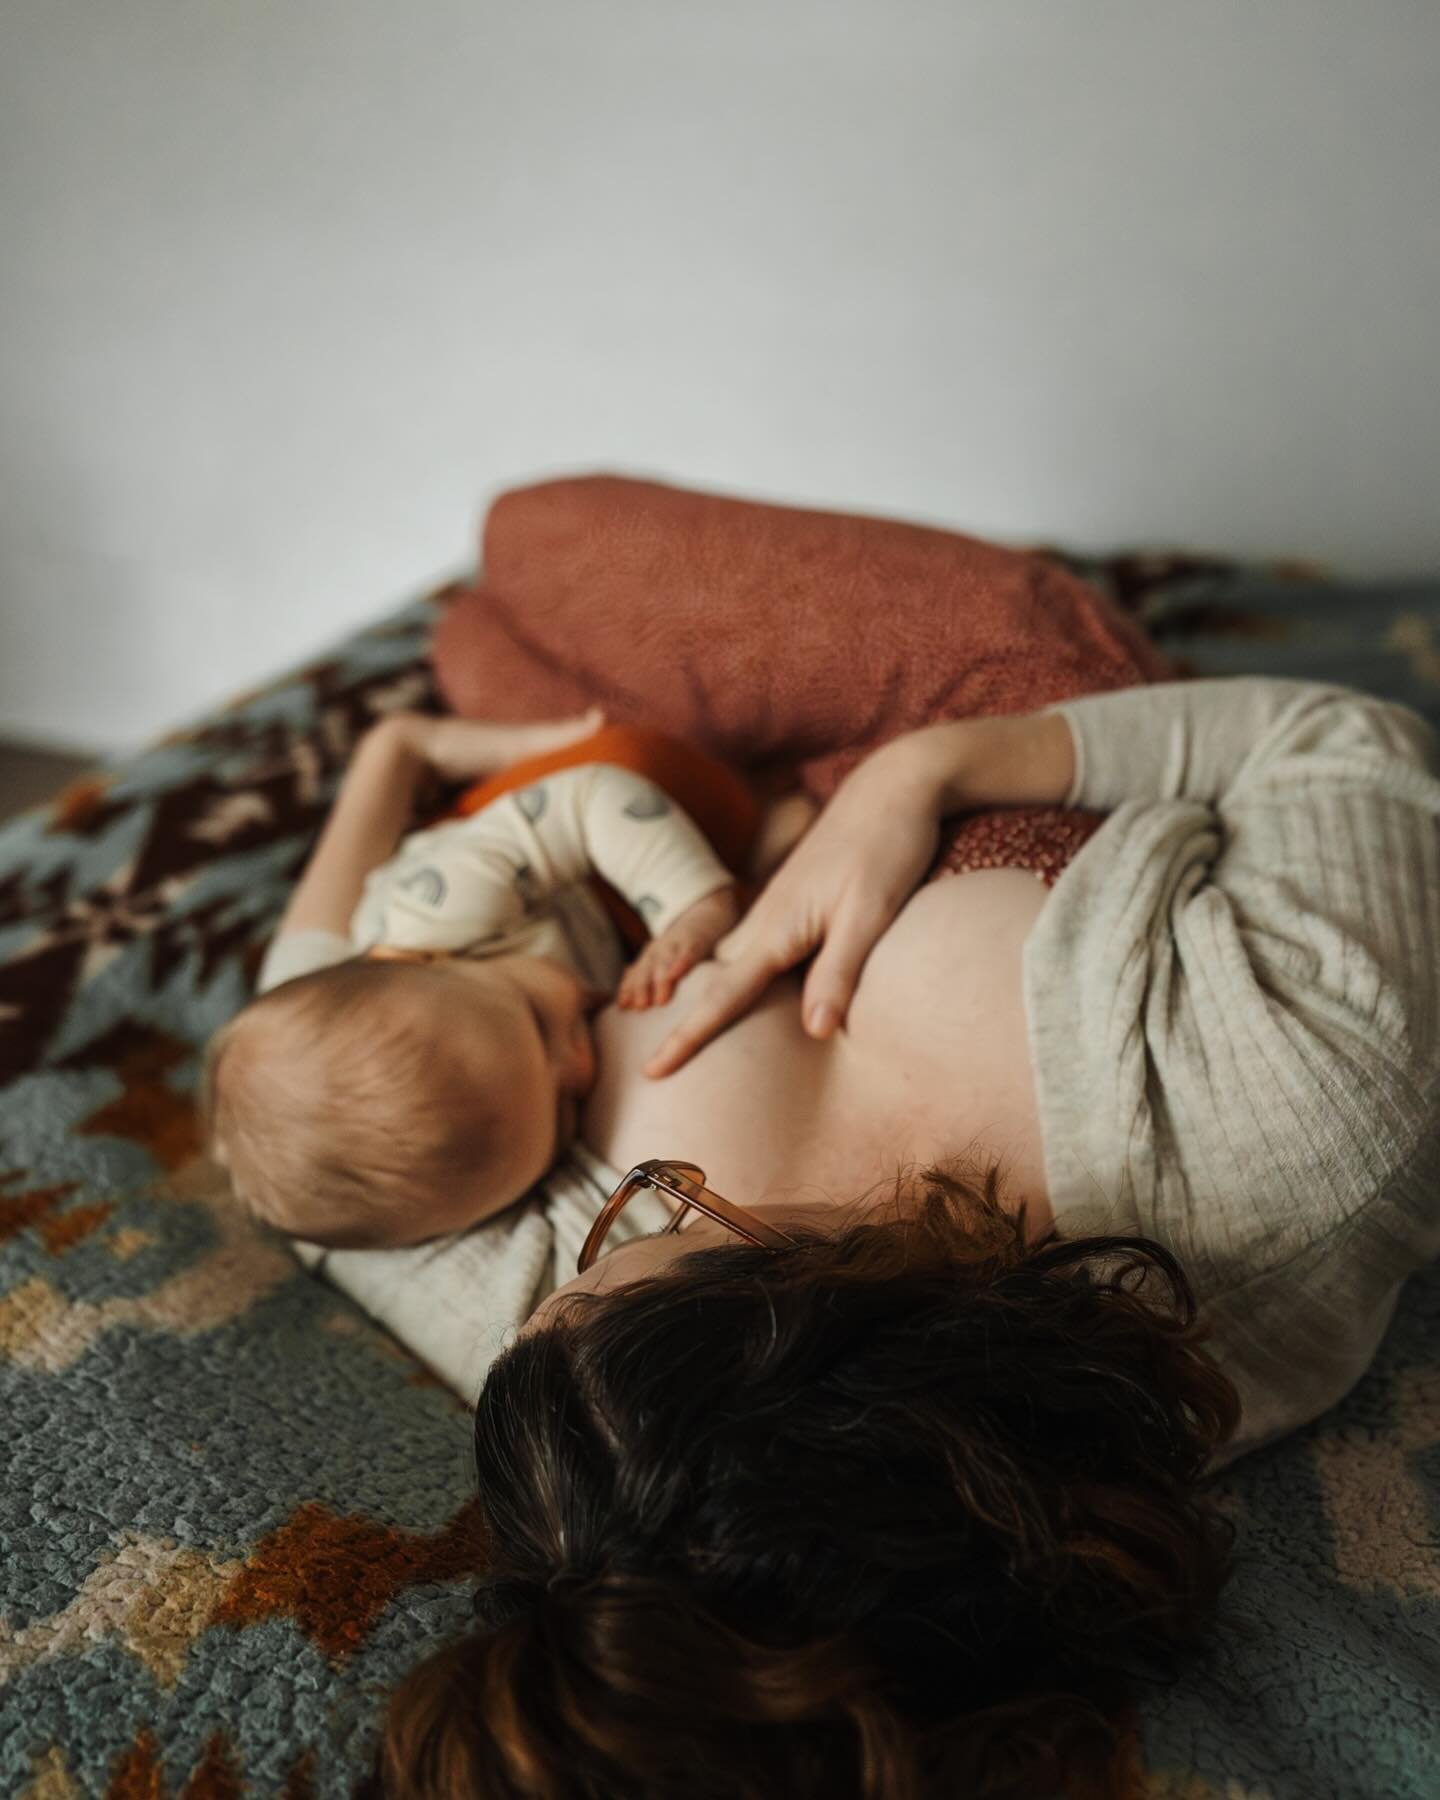 So much of our lives as new mothers is spent feeding our babies, whether we&rsquo;re nursing or bottle feeding formula or pumping or some combination of them all. For the first few months with my newborn, it was at least eight hours of my day, usuall